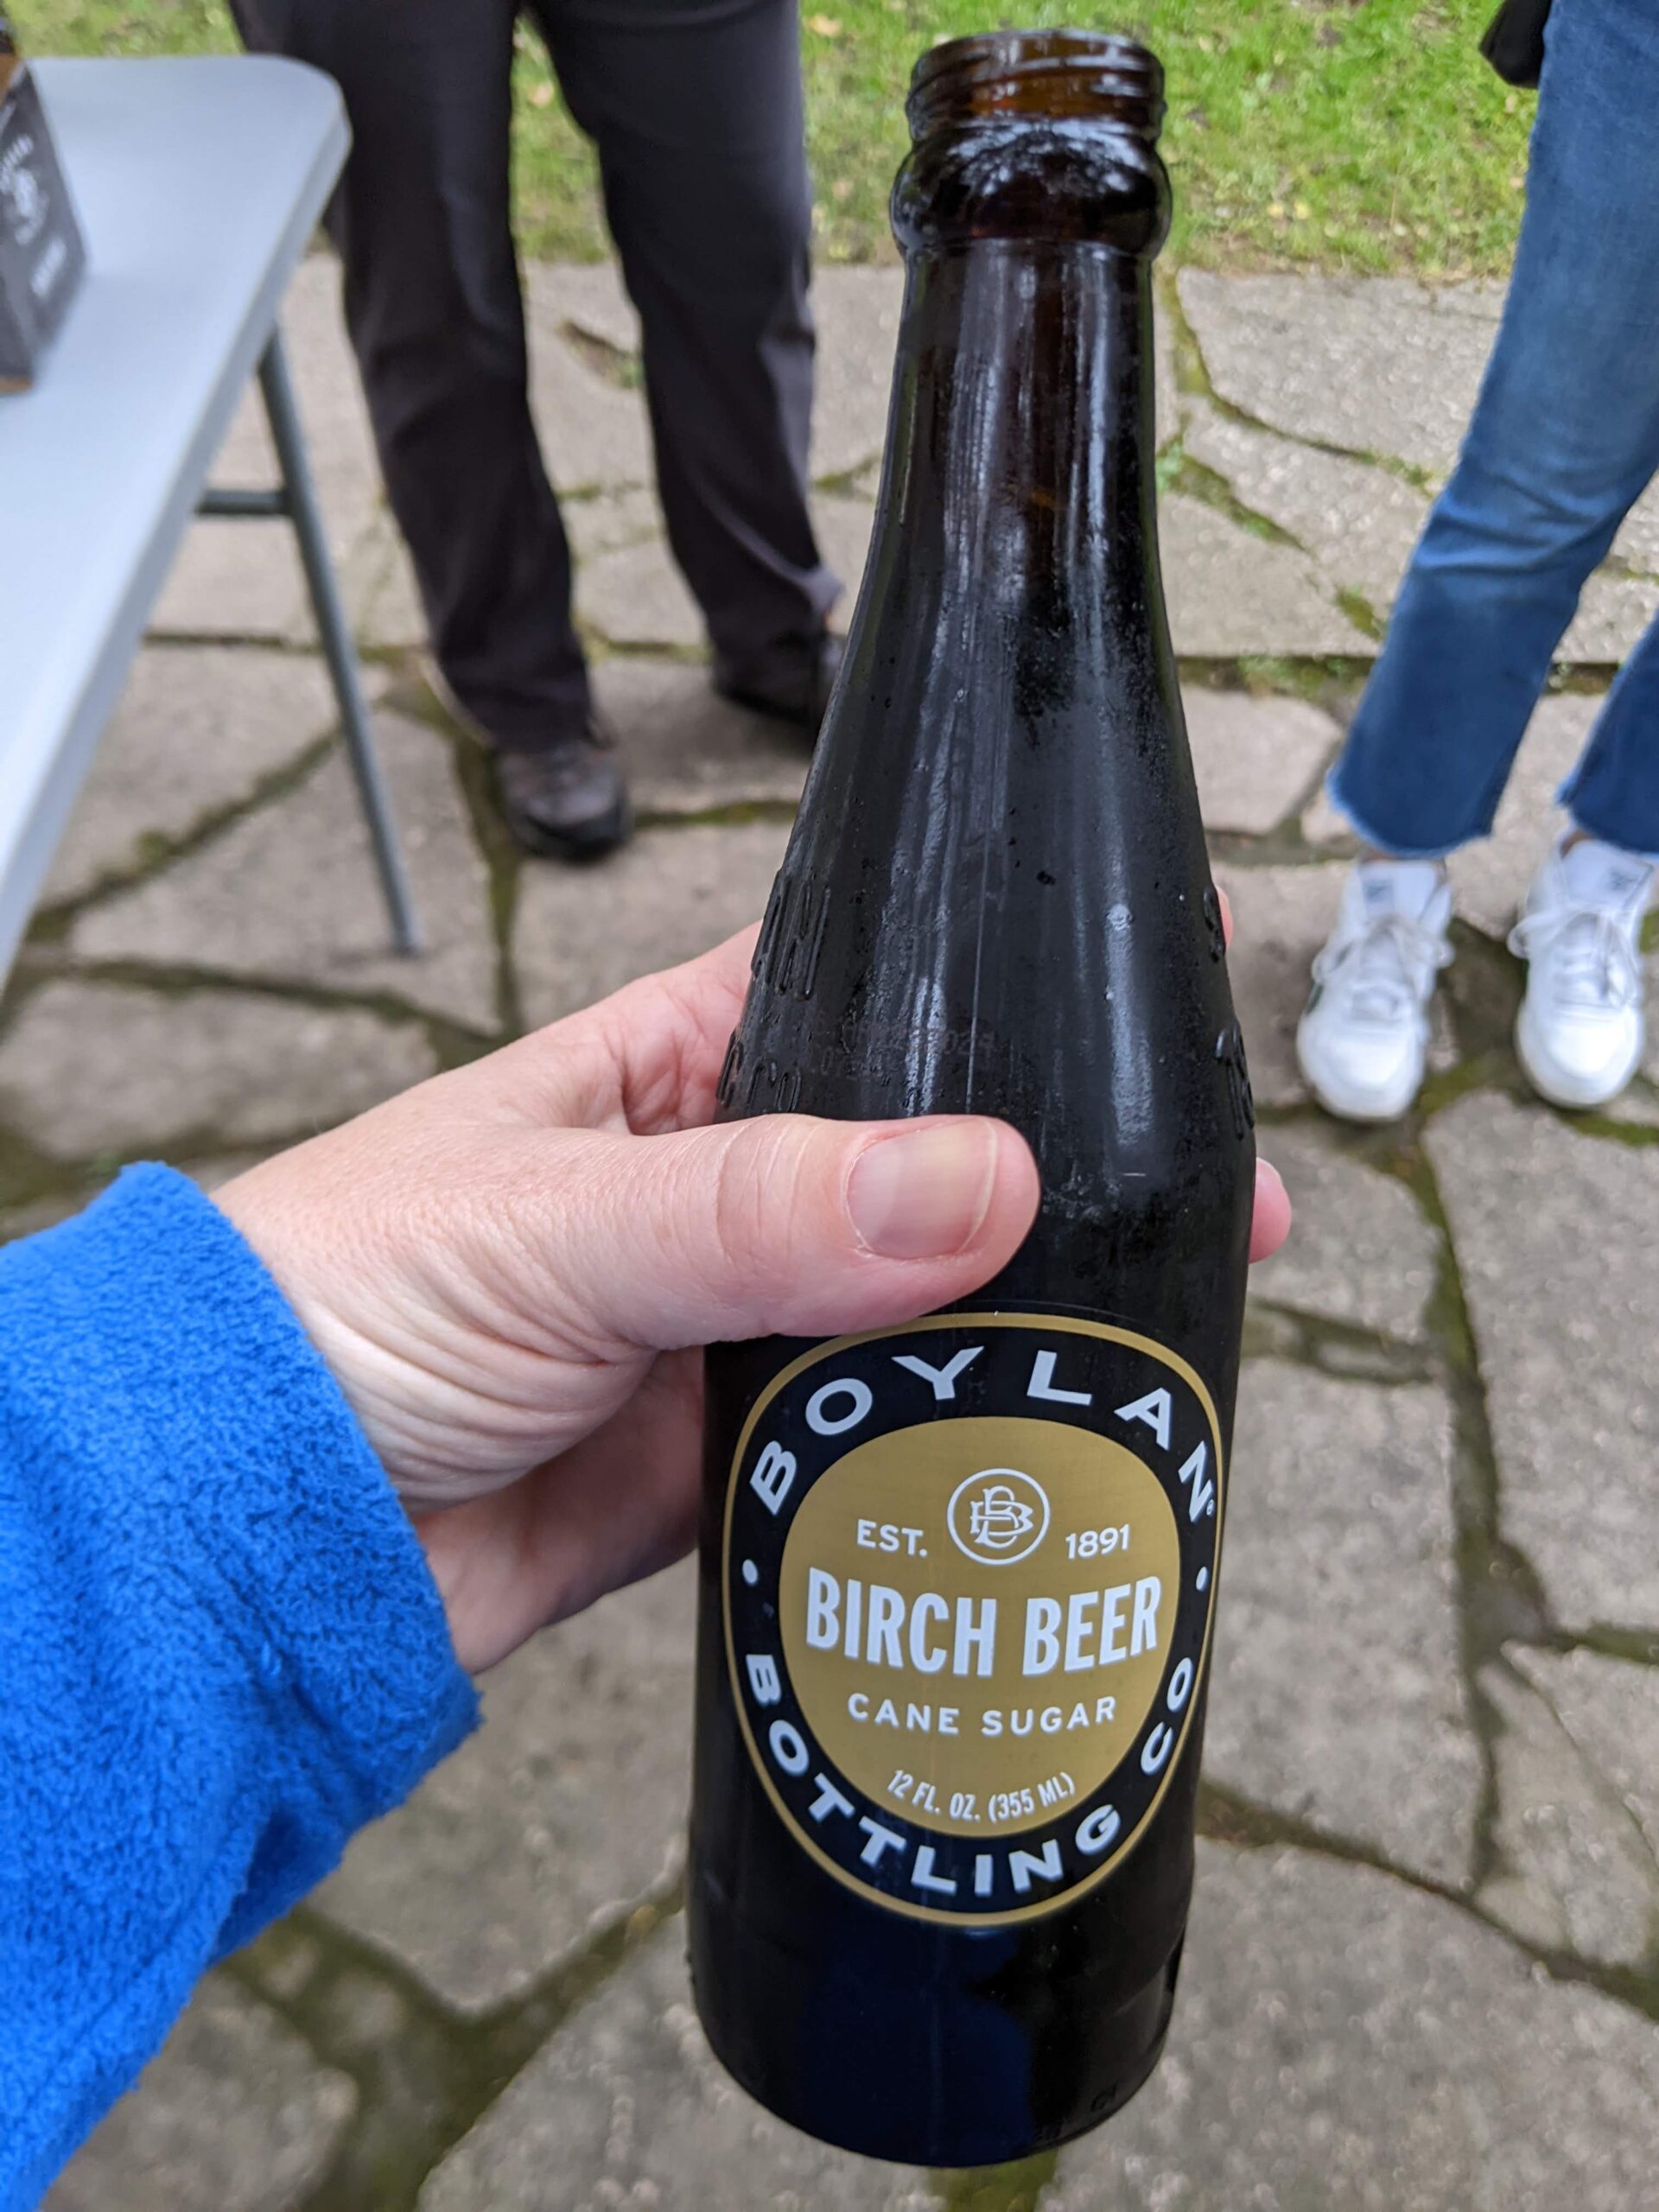 Image of a bottle of Birch Beer